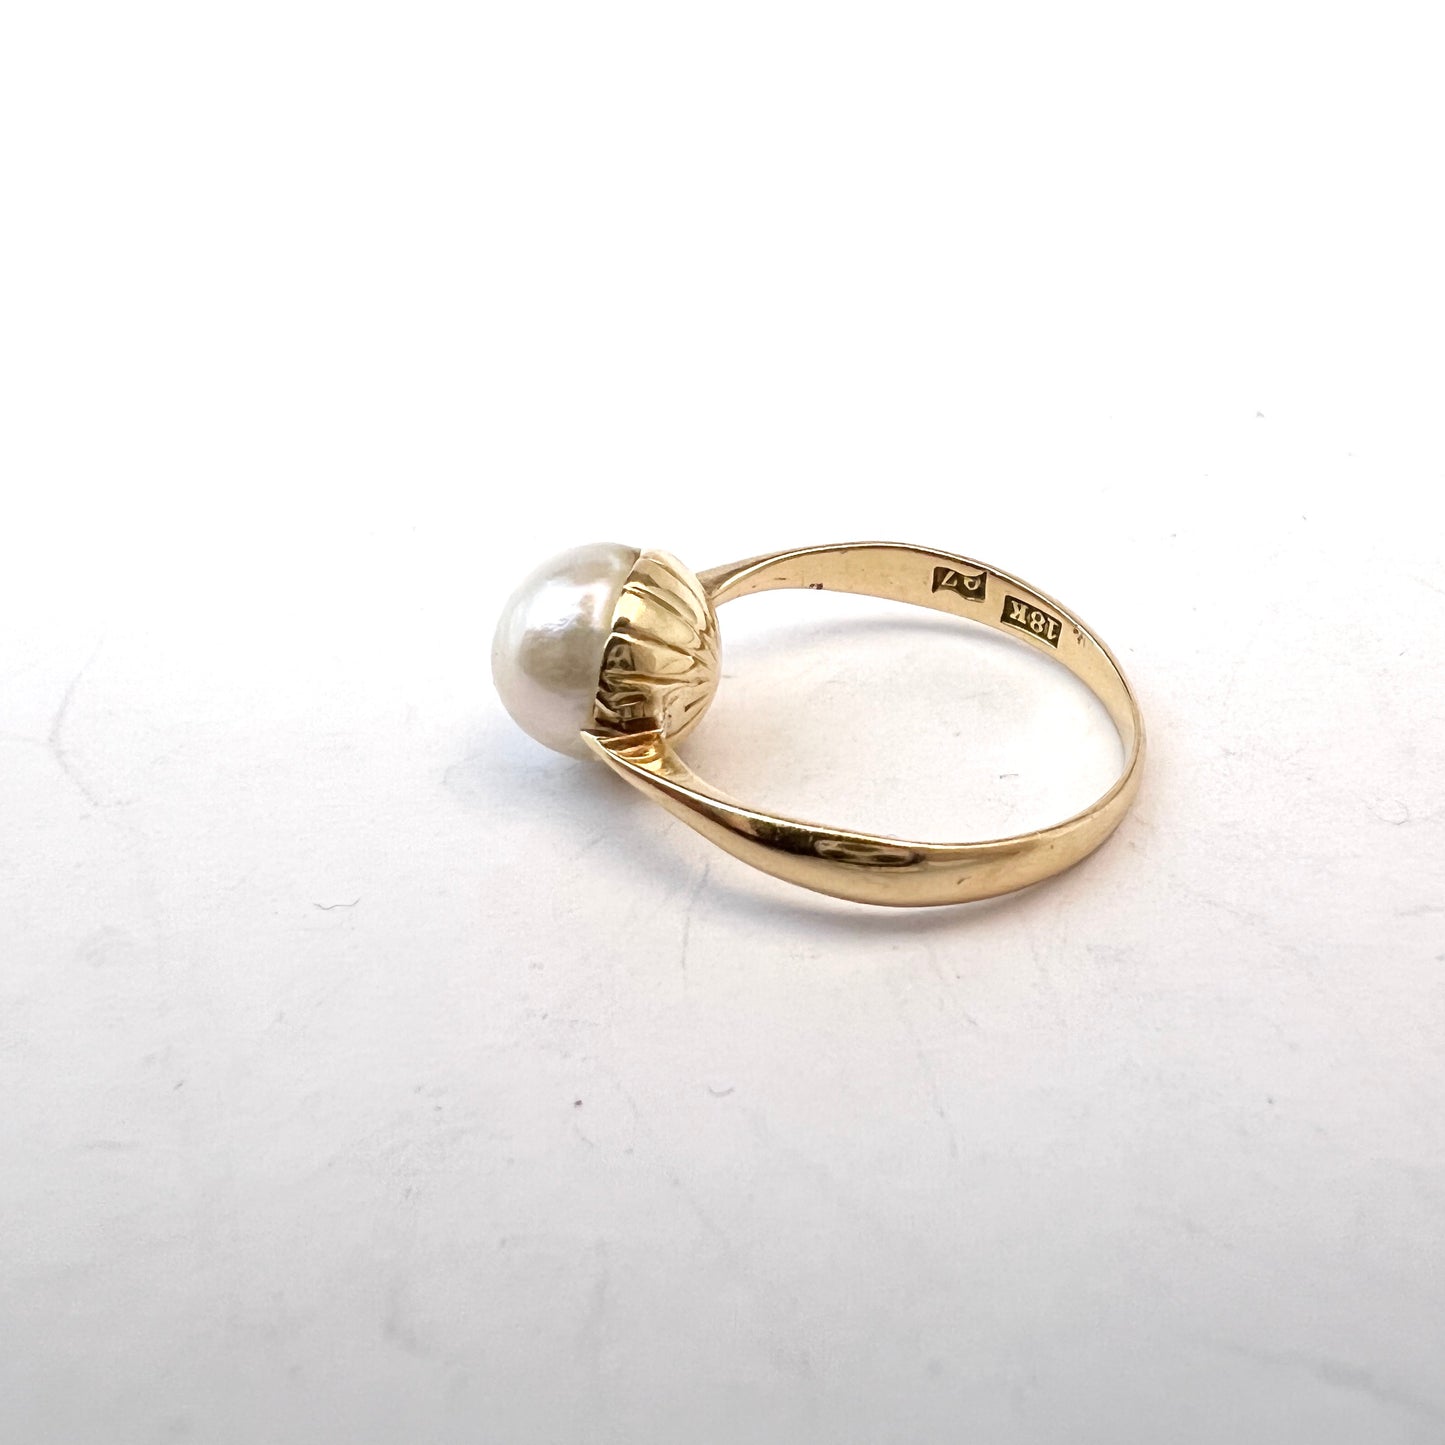 A Rothoff, Sweden 1918. Antique 18k Gold Pearl Ring.